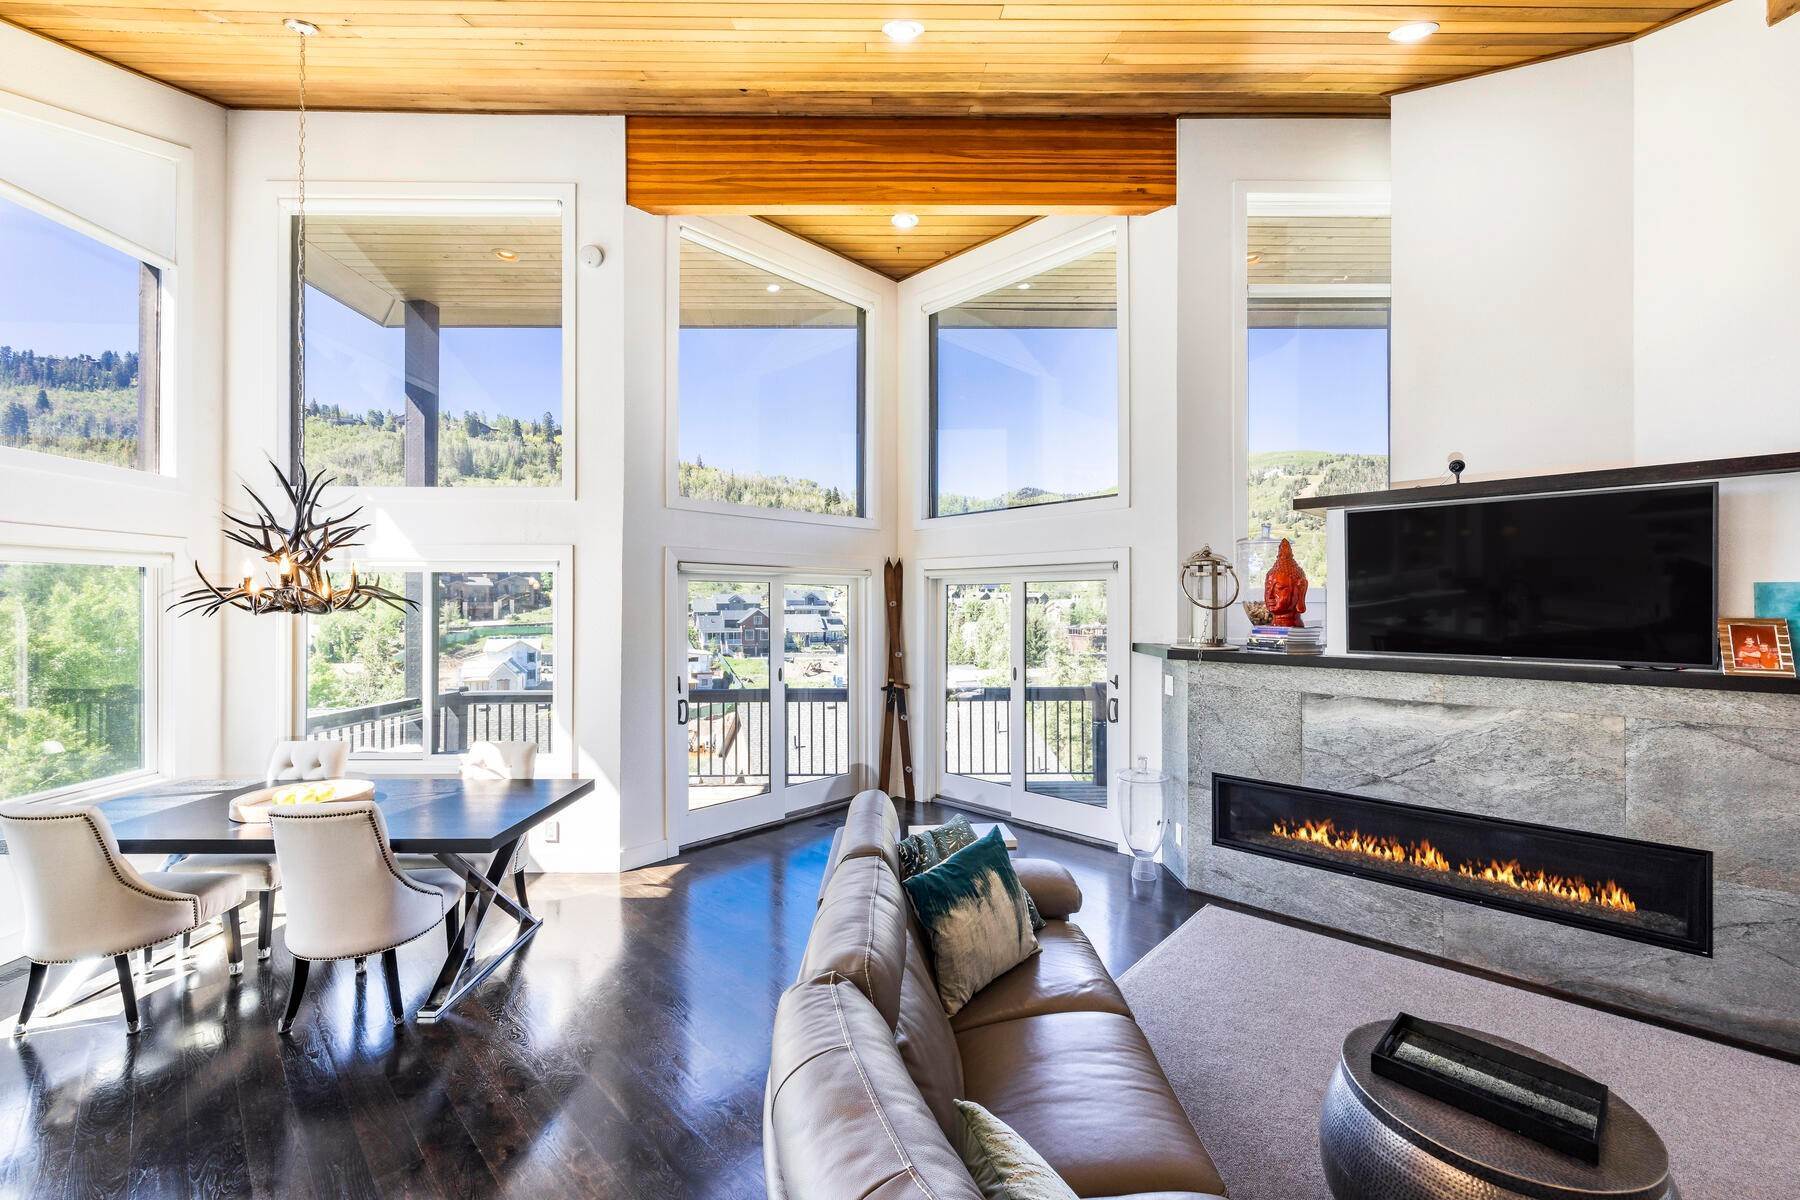 Single Family Homes for Sale at Beautifully Renovated 4 Bedroom Park City Home With Ski Run Views 626 Sunnyside Drive Park City, Utah 84060 United States